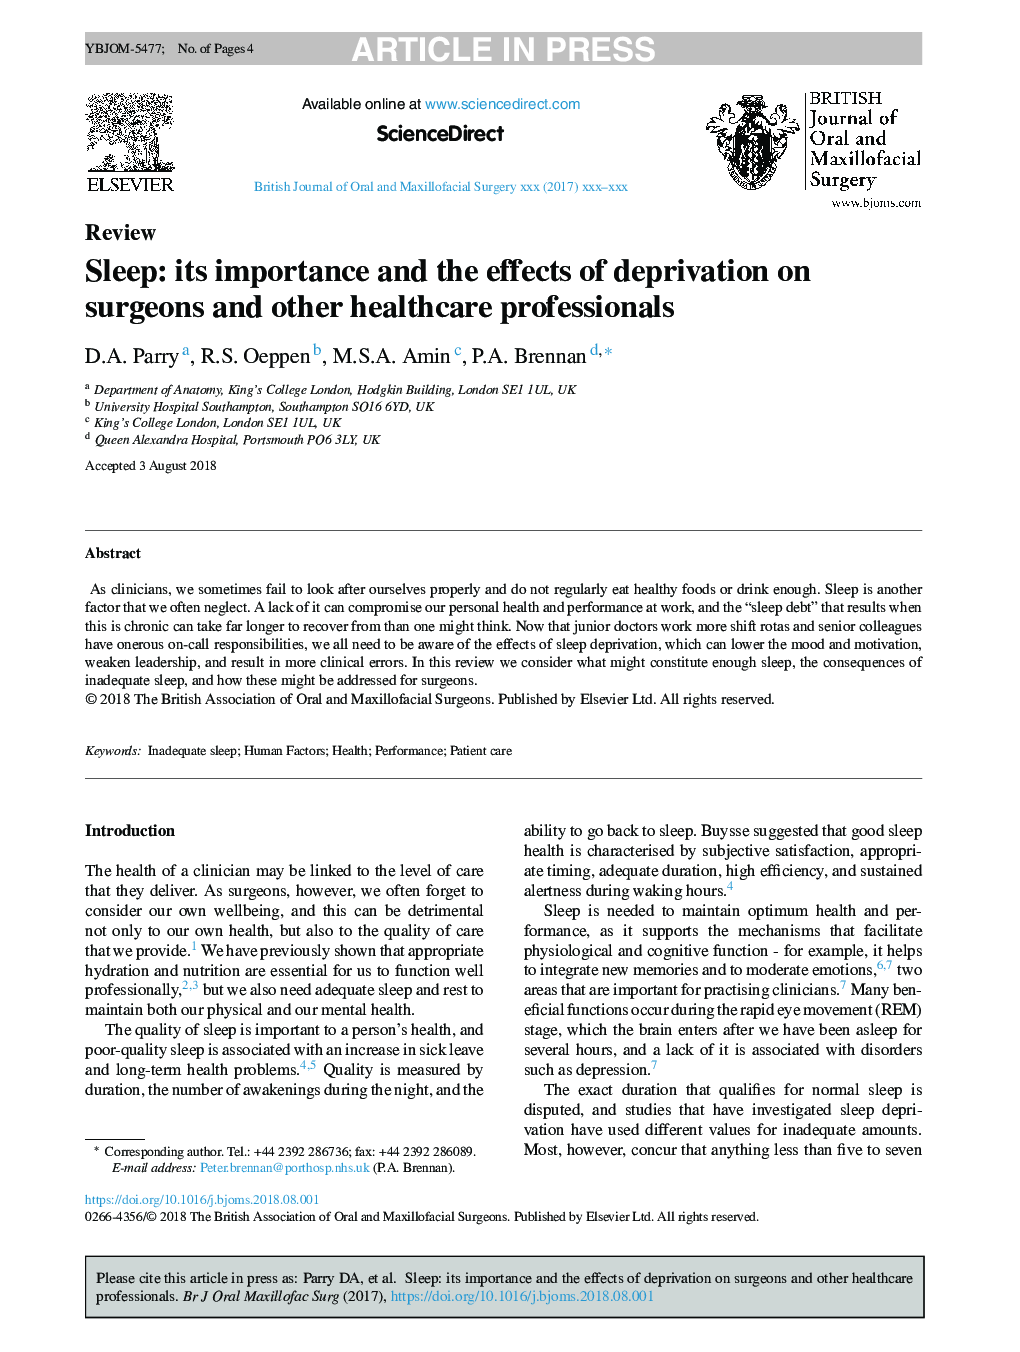 Sleep: its importance and the effects of deprivation on surgeons and other healthcare professionals